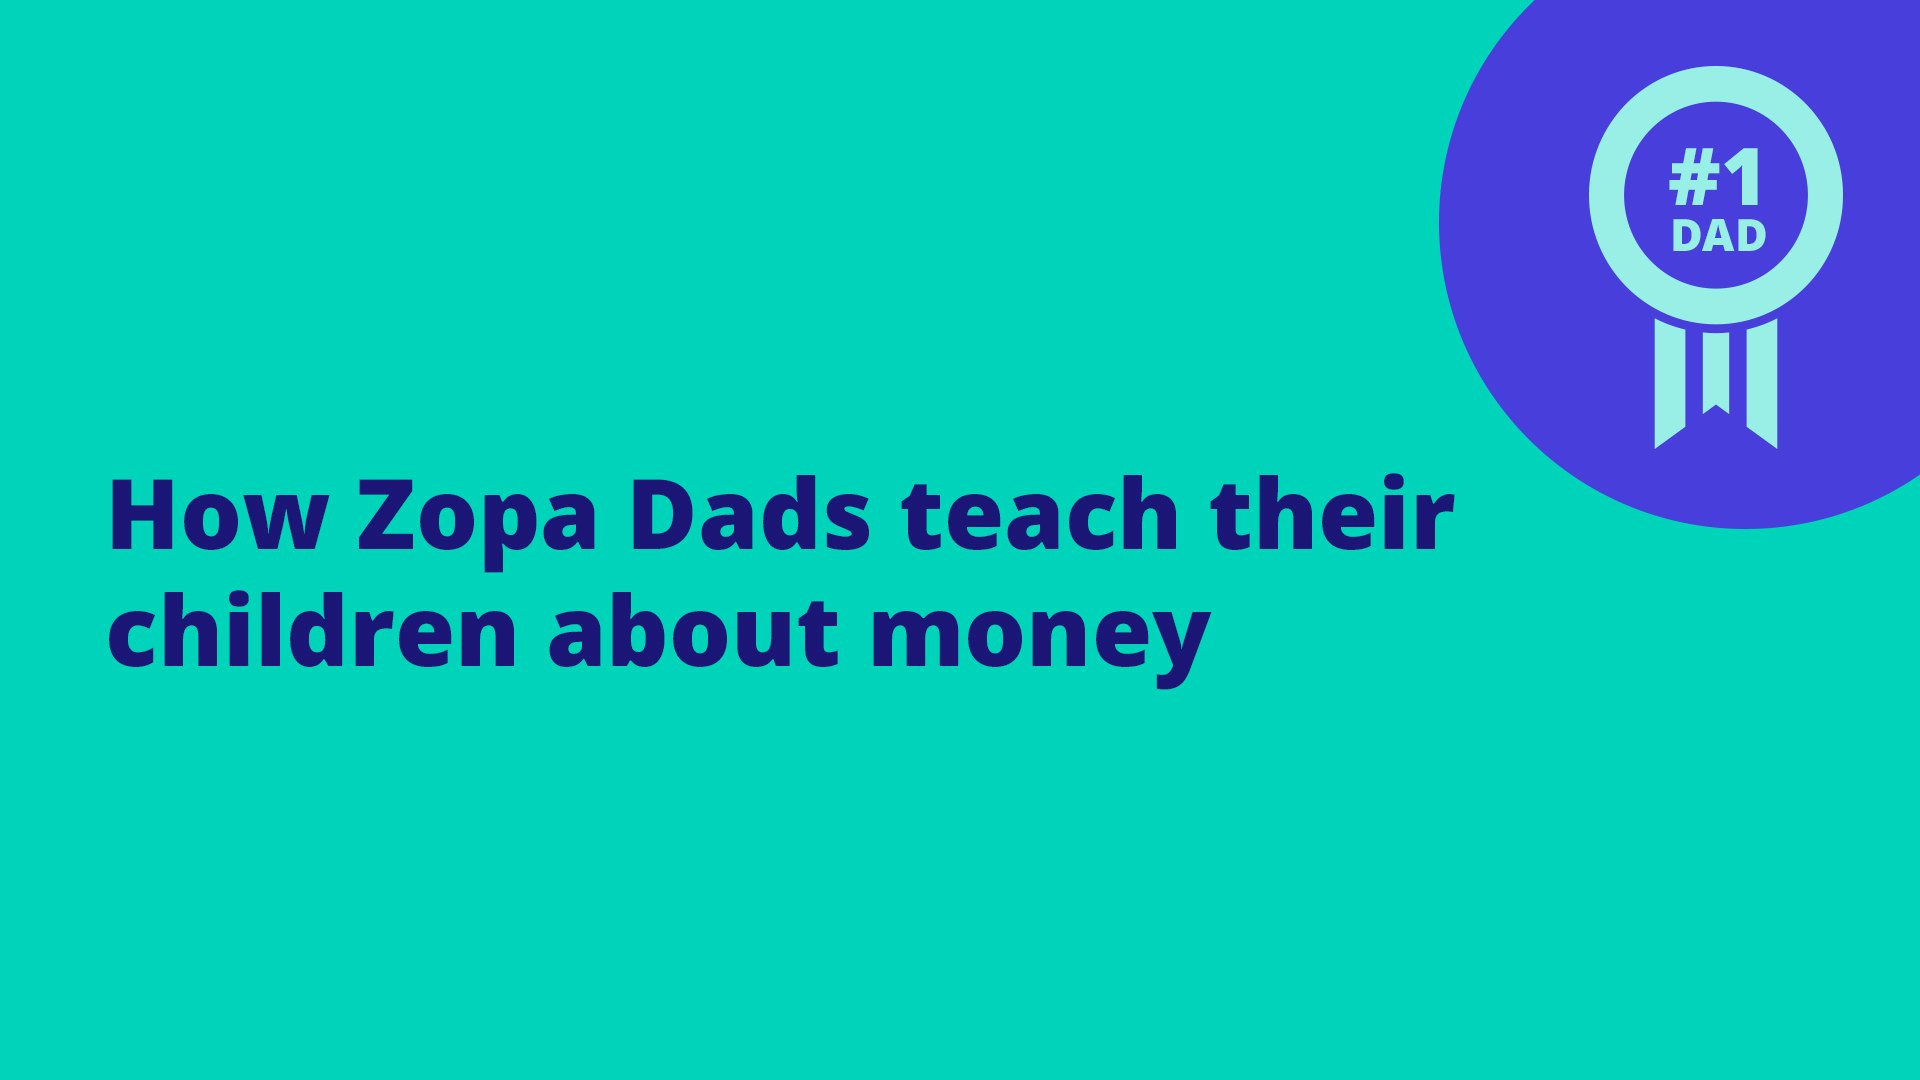 teaching-children-about-money-tips-from-zopa-s-dads